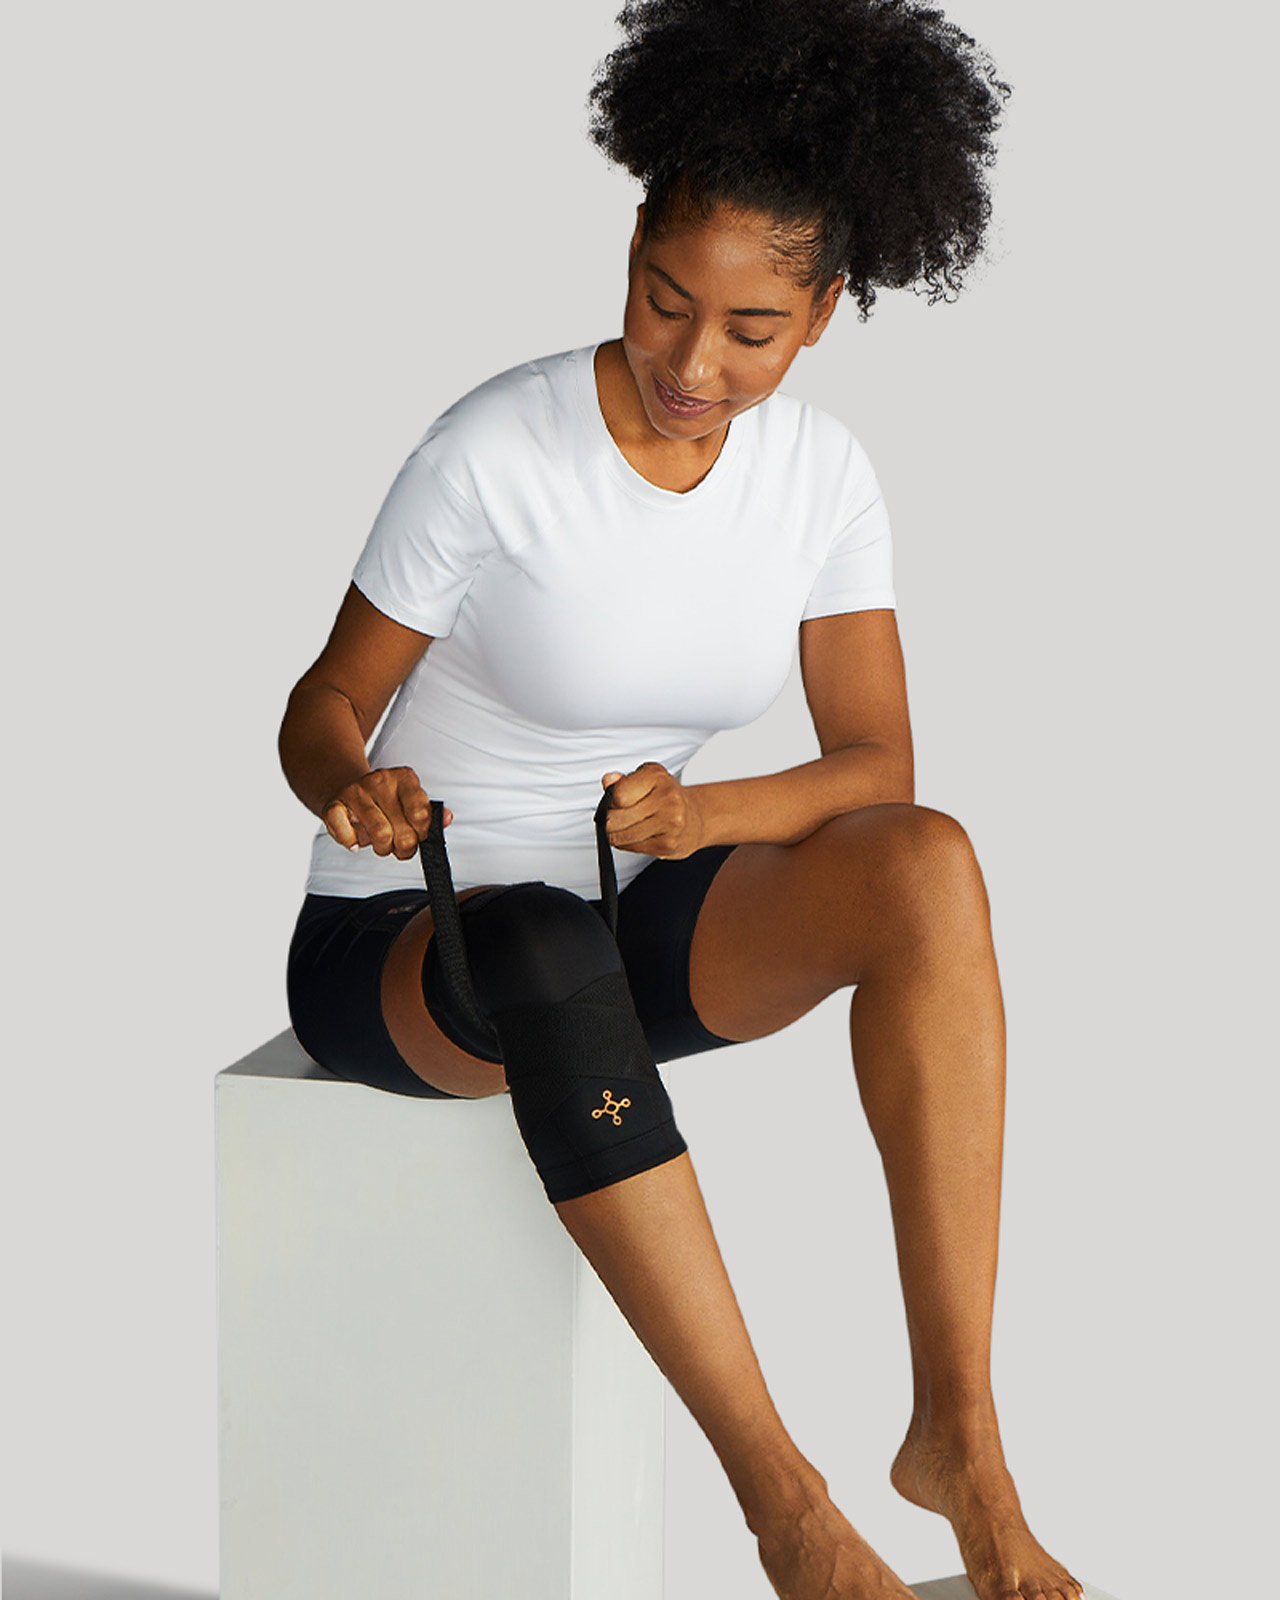 Tommie Copper Knee Sleeve Compression Brace Core Support Pain